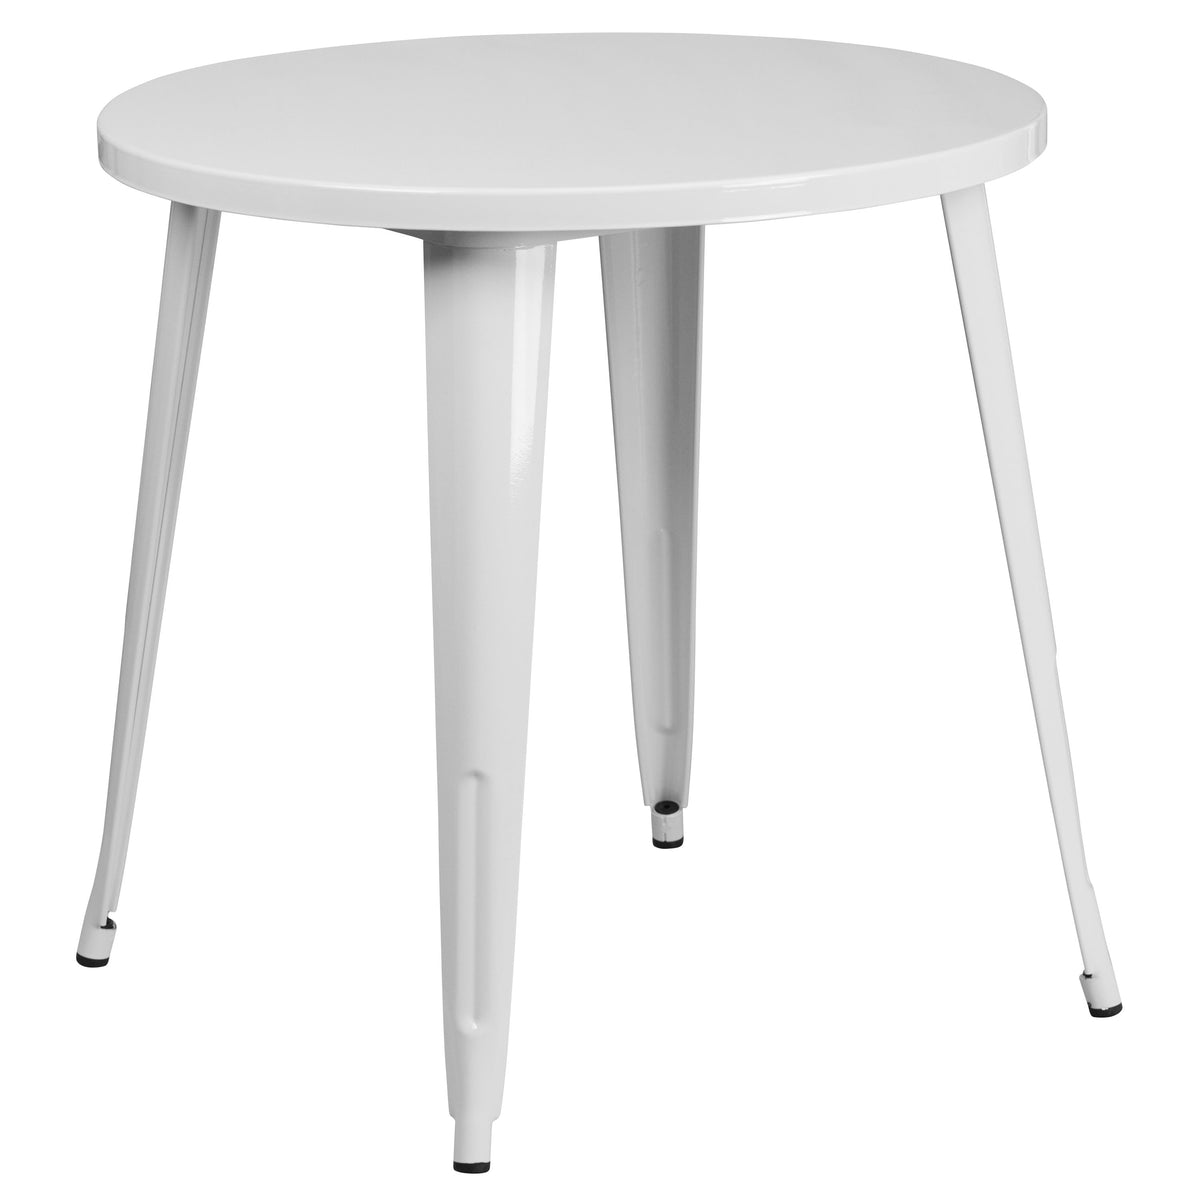 White |#| 30inch Round White Metal Indoor-Outdoor Table Set with 4 Cafe Chairs